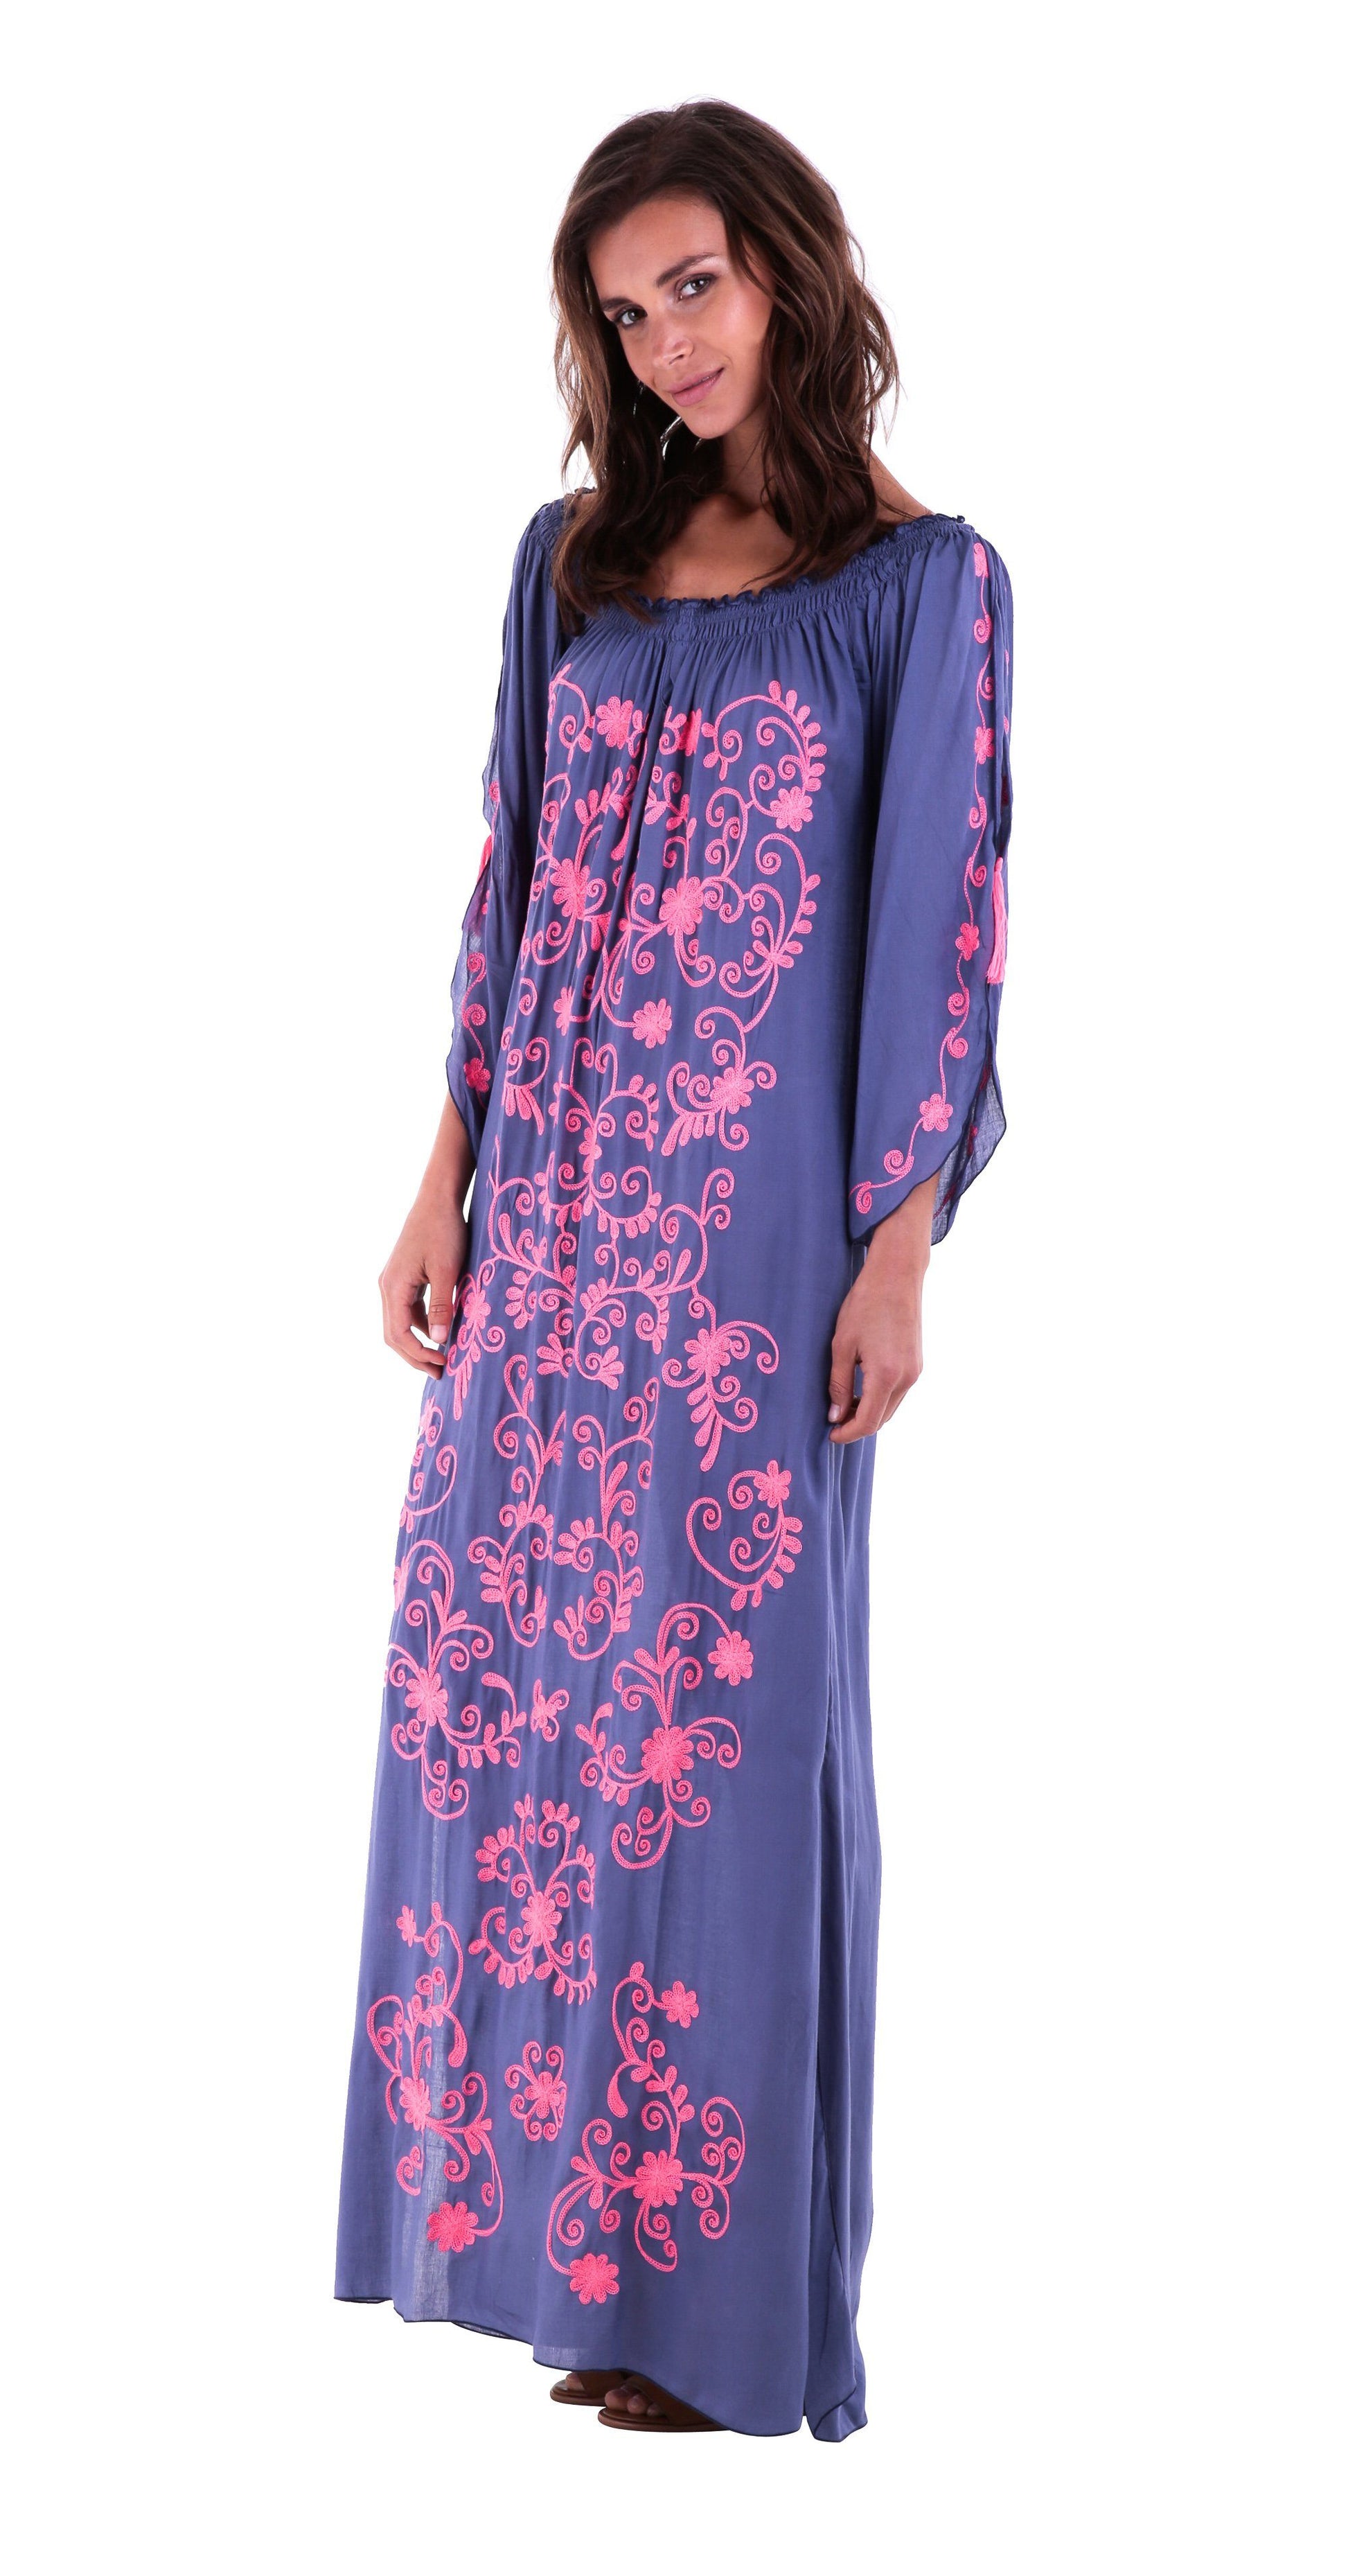 Chloe Embroidered Maxi Dress with Side Slit - Love-Shu-Shi-Periwinkle Maxi Dress